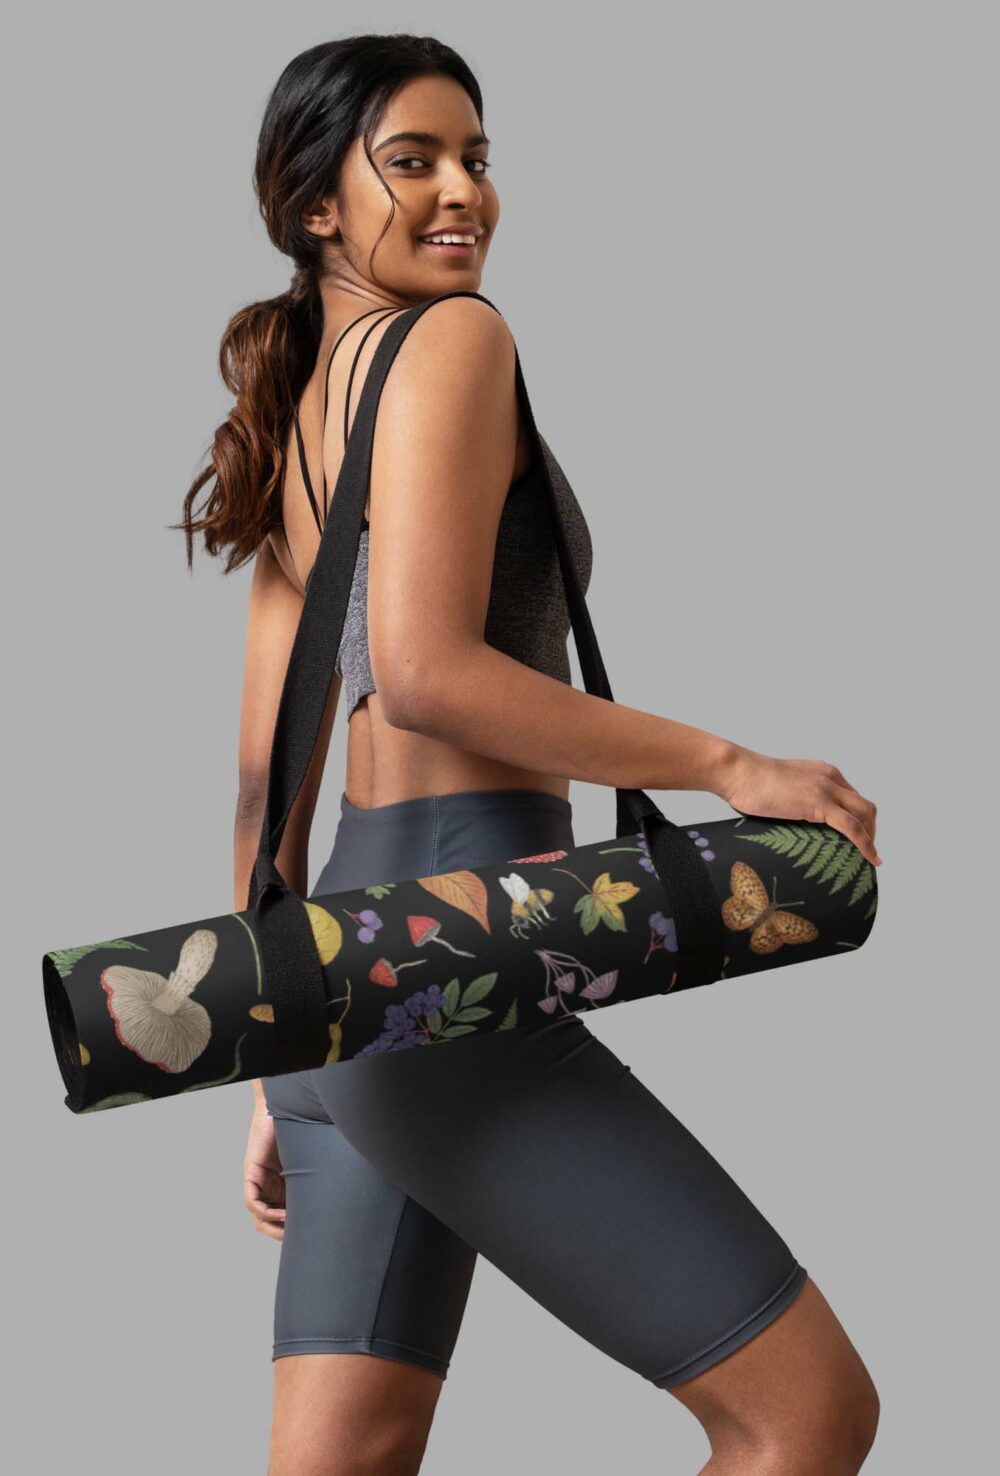 cosmic drifters hedge witch print yoga mat lifestyle